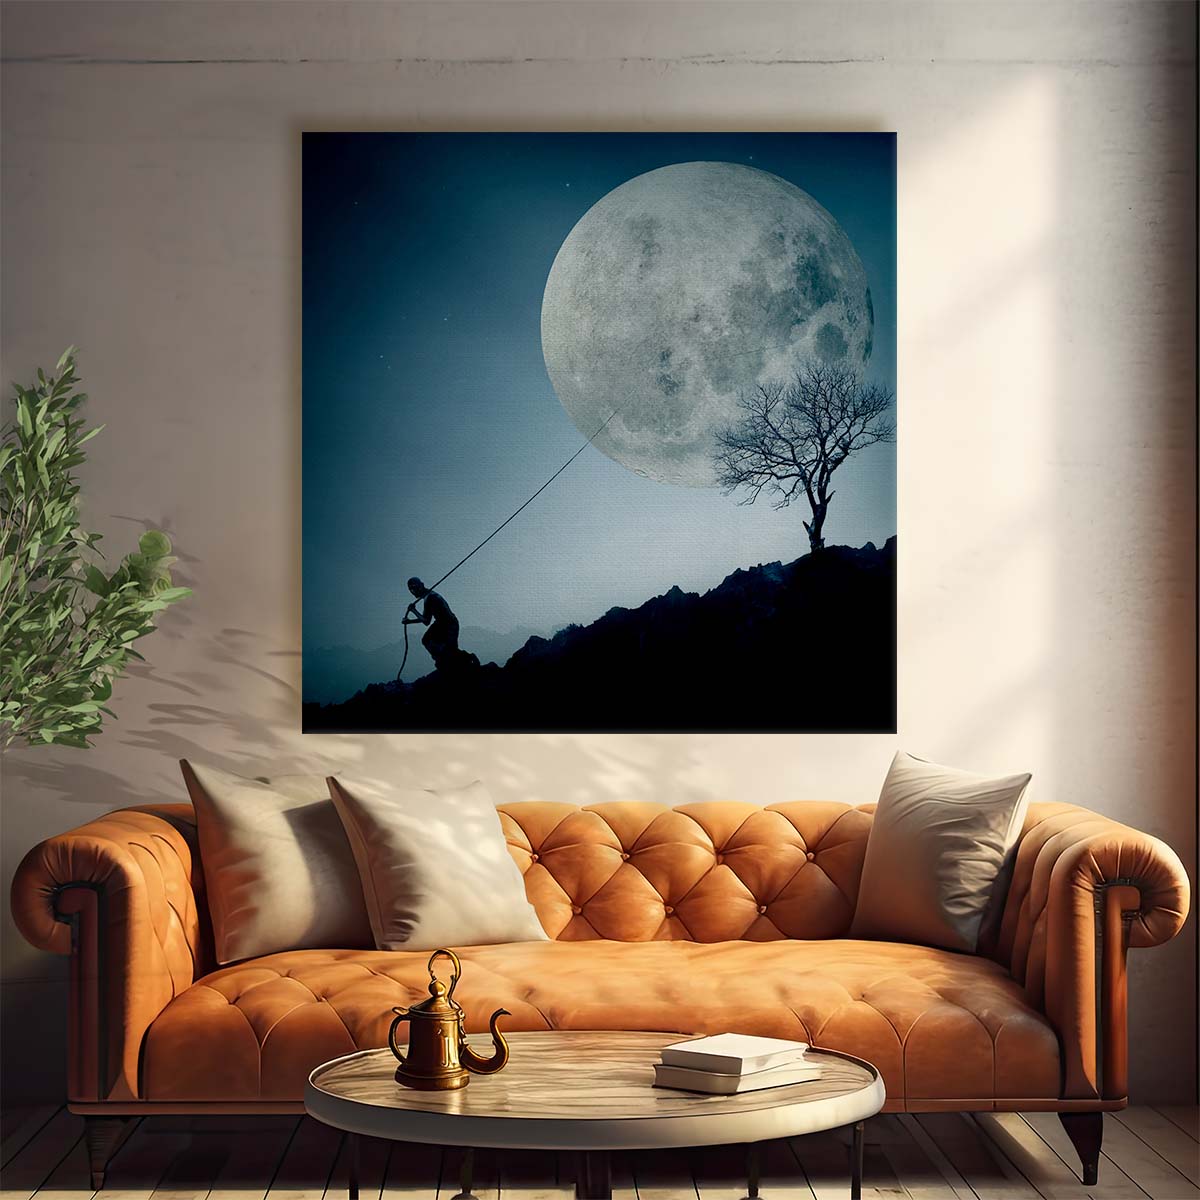 Astronomical Moonrise Silhouette Surreal Landscape Photography Wall Art by Luxuriance Designs. Made in USA.